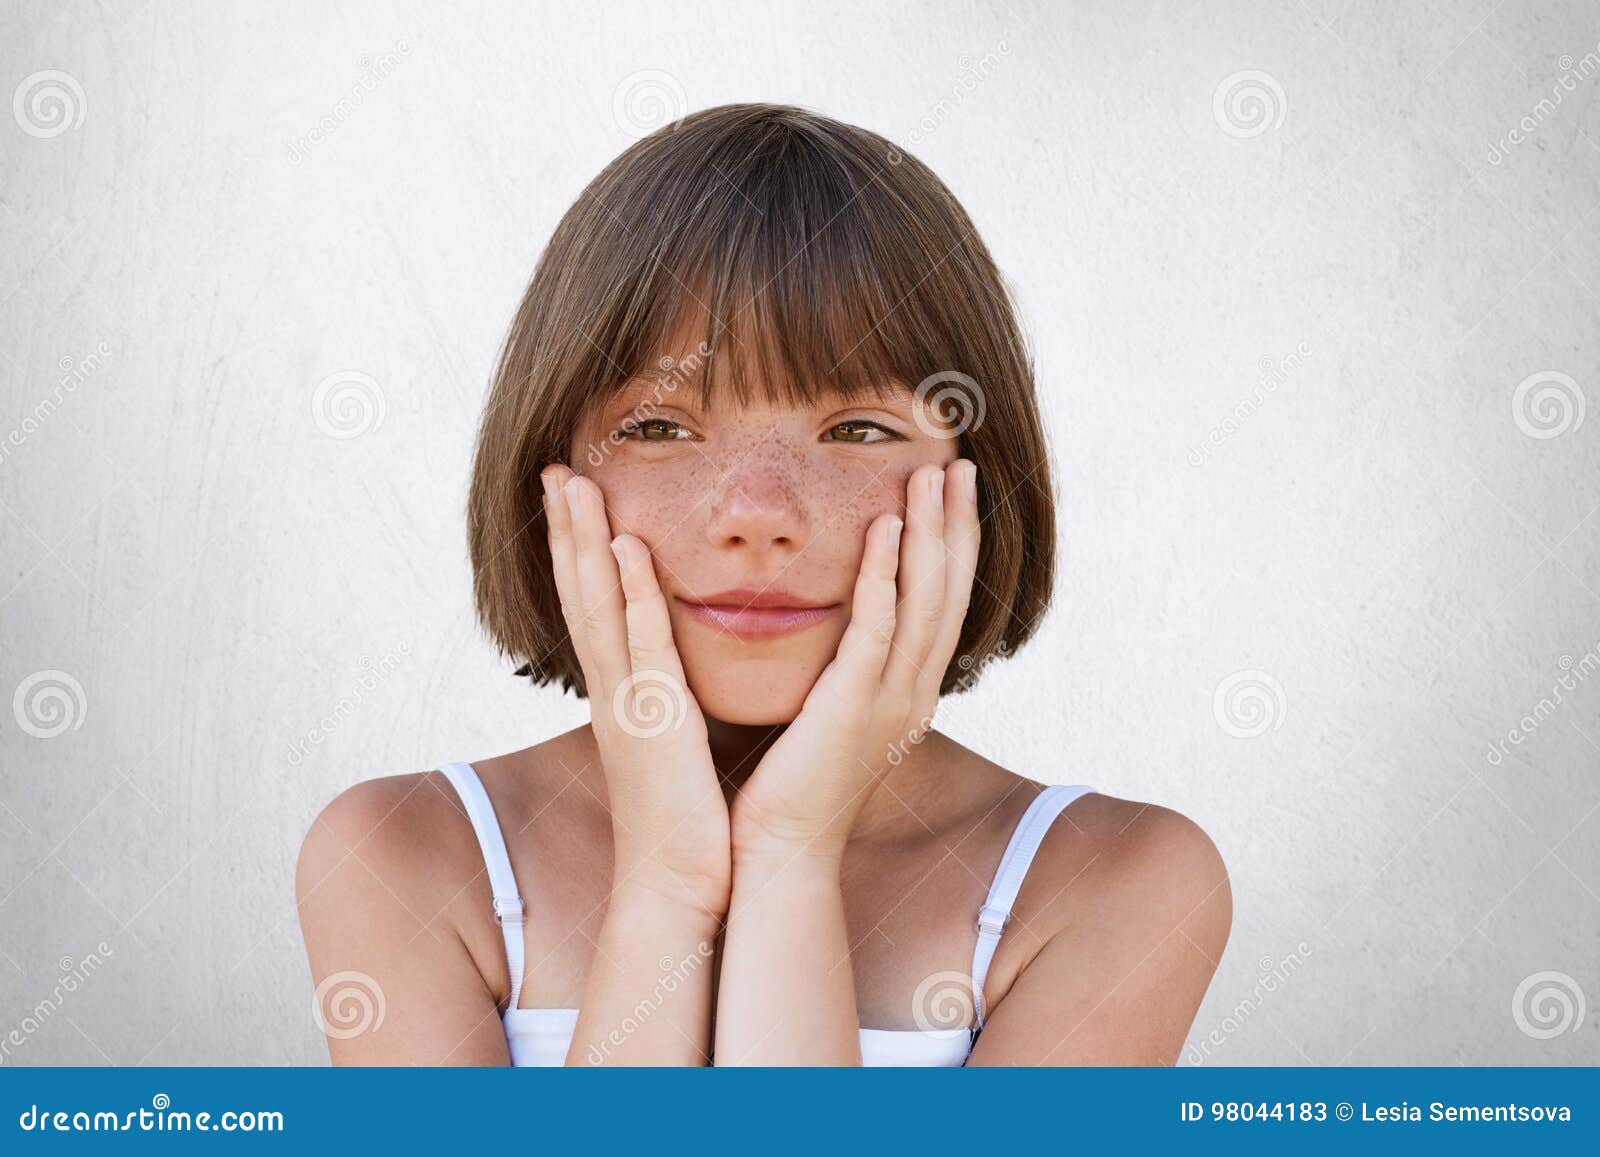 close up portrait of adorable freckled girl with bobbed hairstyle, keeping her hands on cheeks, having dreamy expression, dreaming